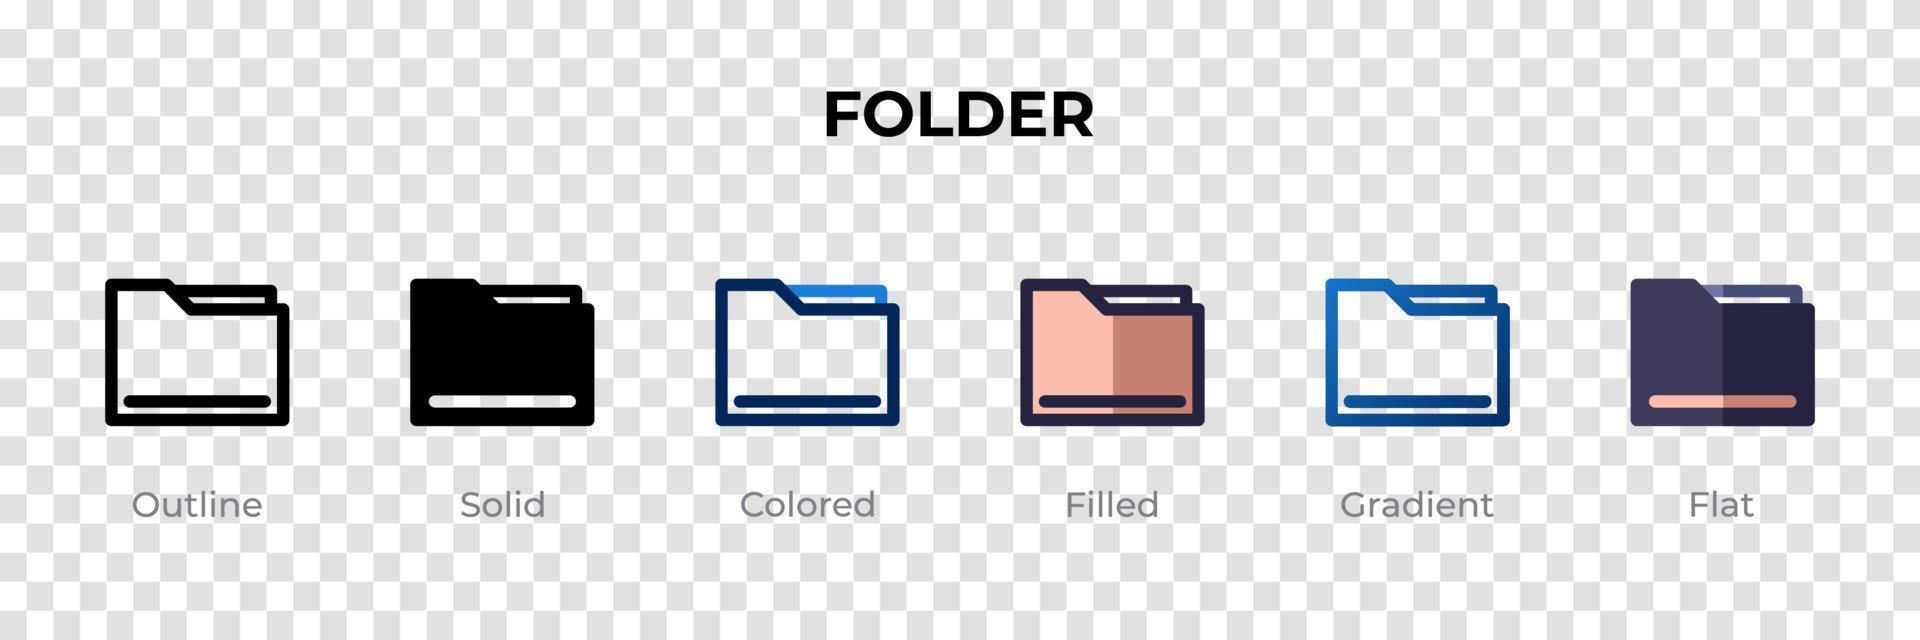 Folder icon in different style. Folder vector icons designed in outline, solid, colored, filled, gradient, and flat style. Symbol, logo illustration. Vector illustration